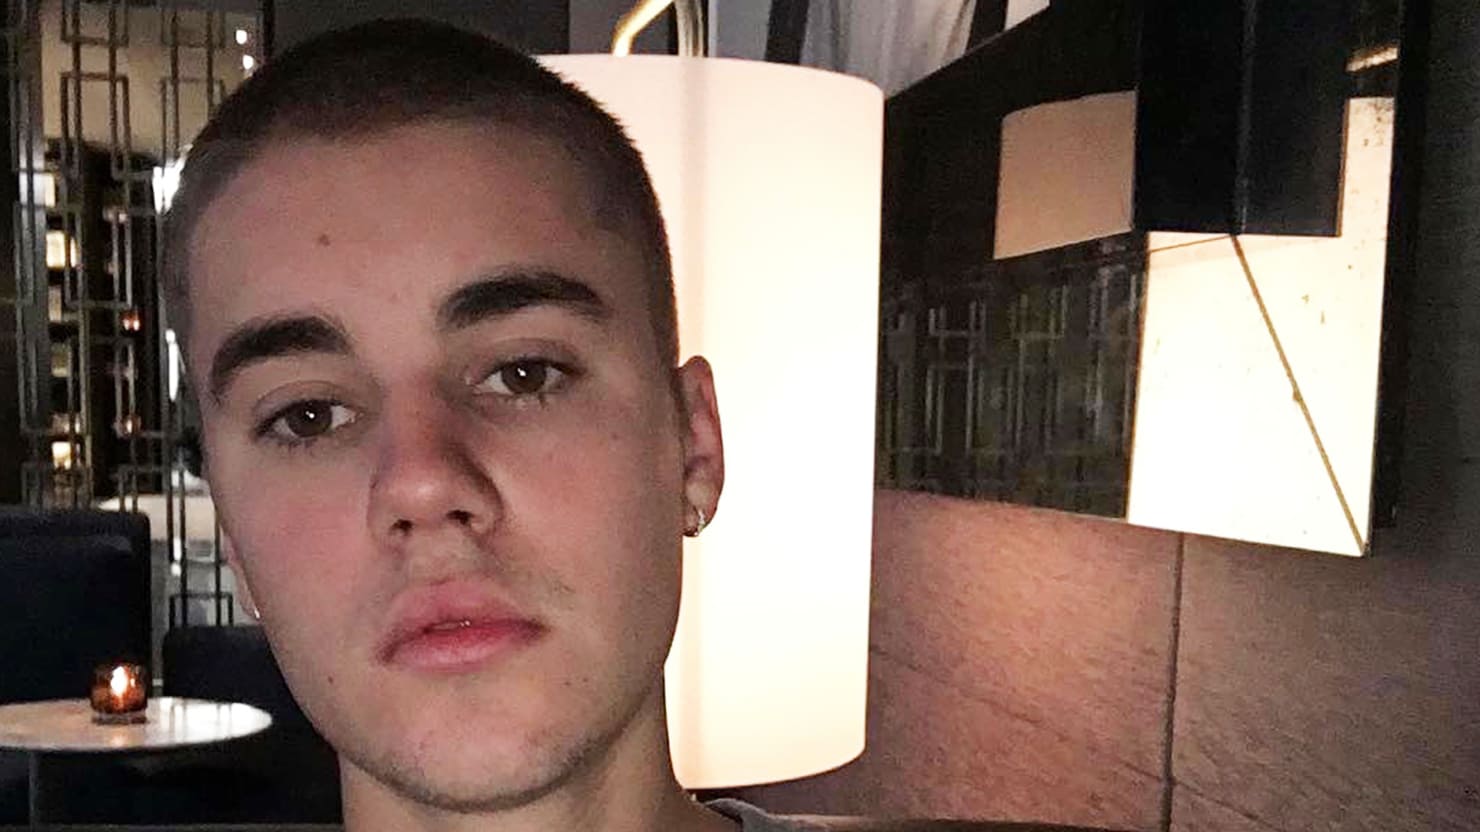 Have a look at Justin Bieber's wildest posts on Instagram